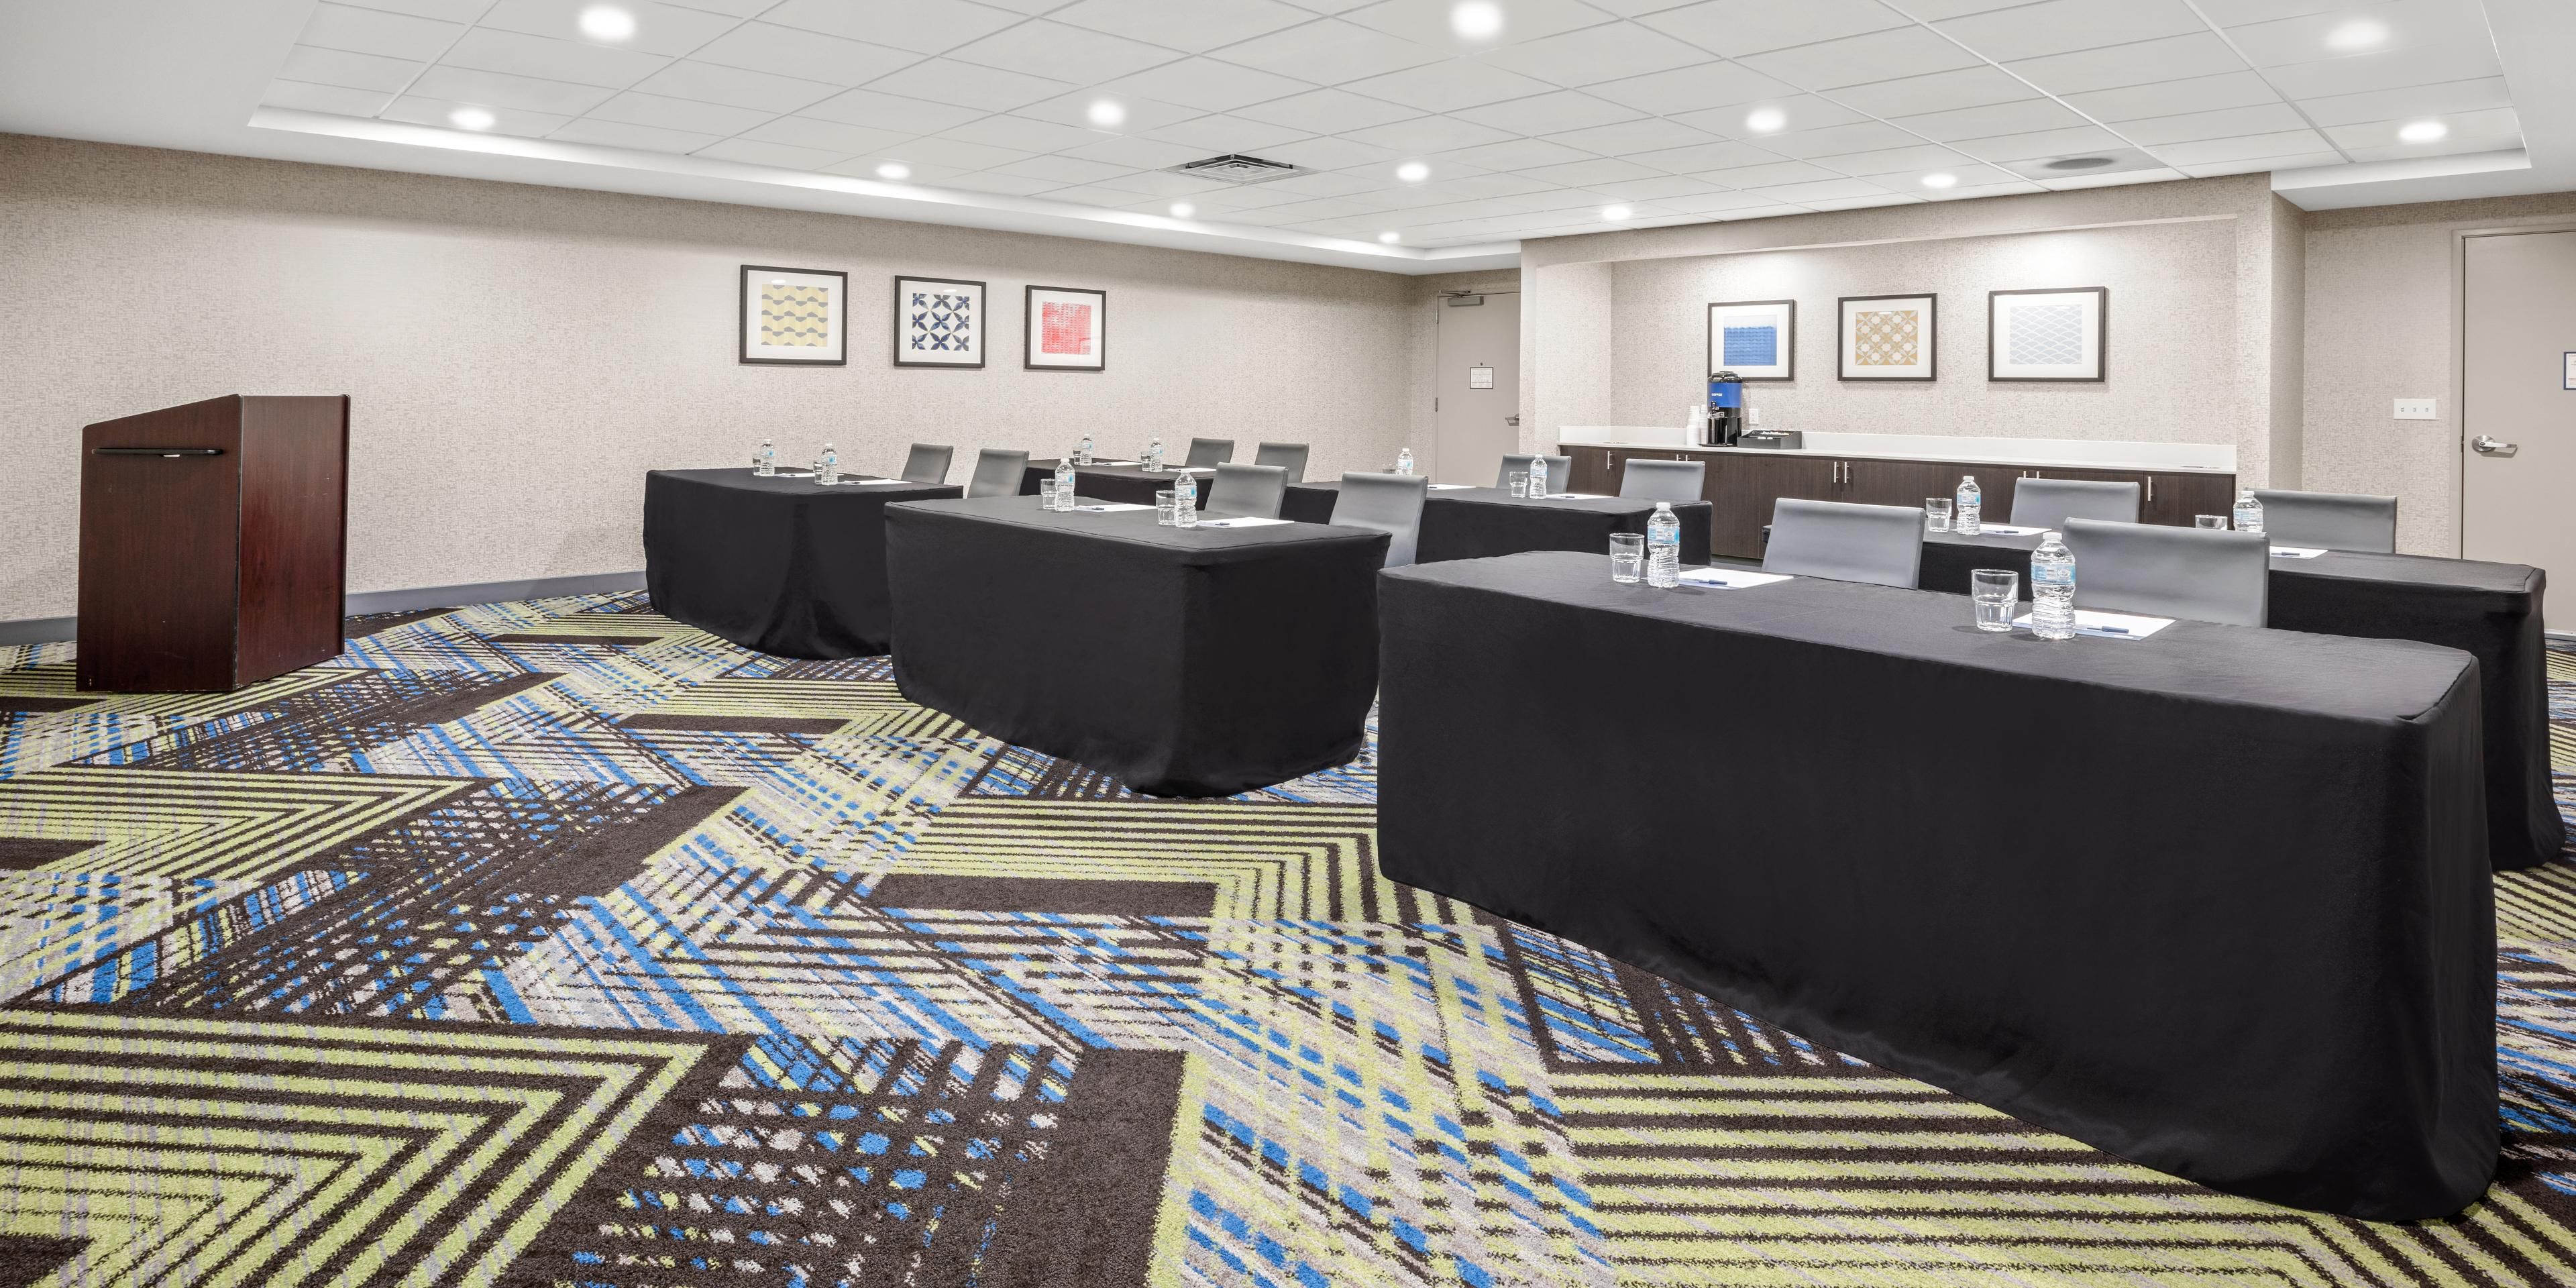 Planning a meeting or family gathering? We would love to be the host your special event, whether you are planning a business meeting, graduation, birthday celebration, etc. our Holiday Inn Express & Suites offer’s a combined total of 860 SF of spaces between our two meeting spaces. Let us take the stress out of planning and host your meeting. 